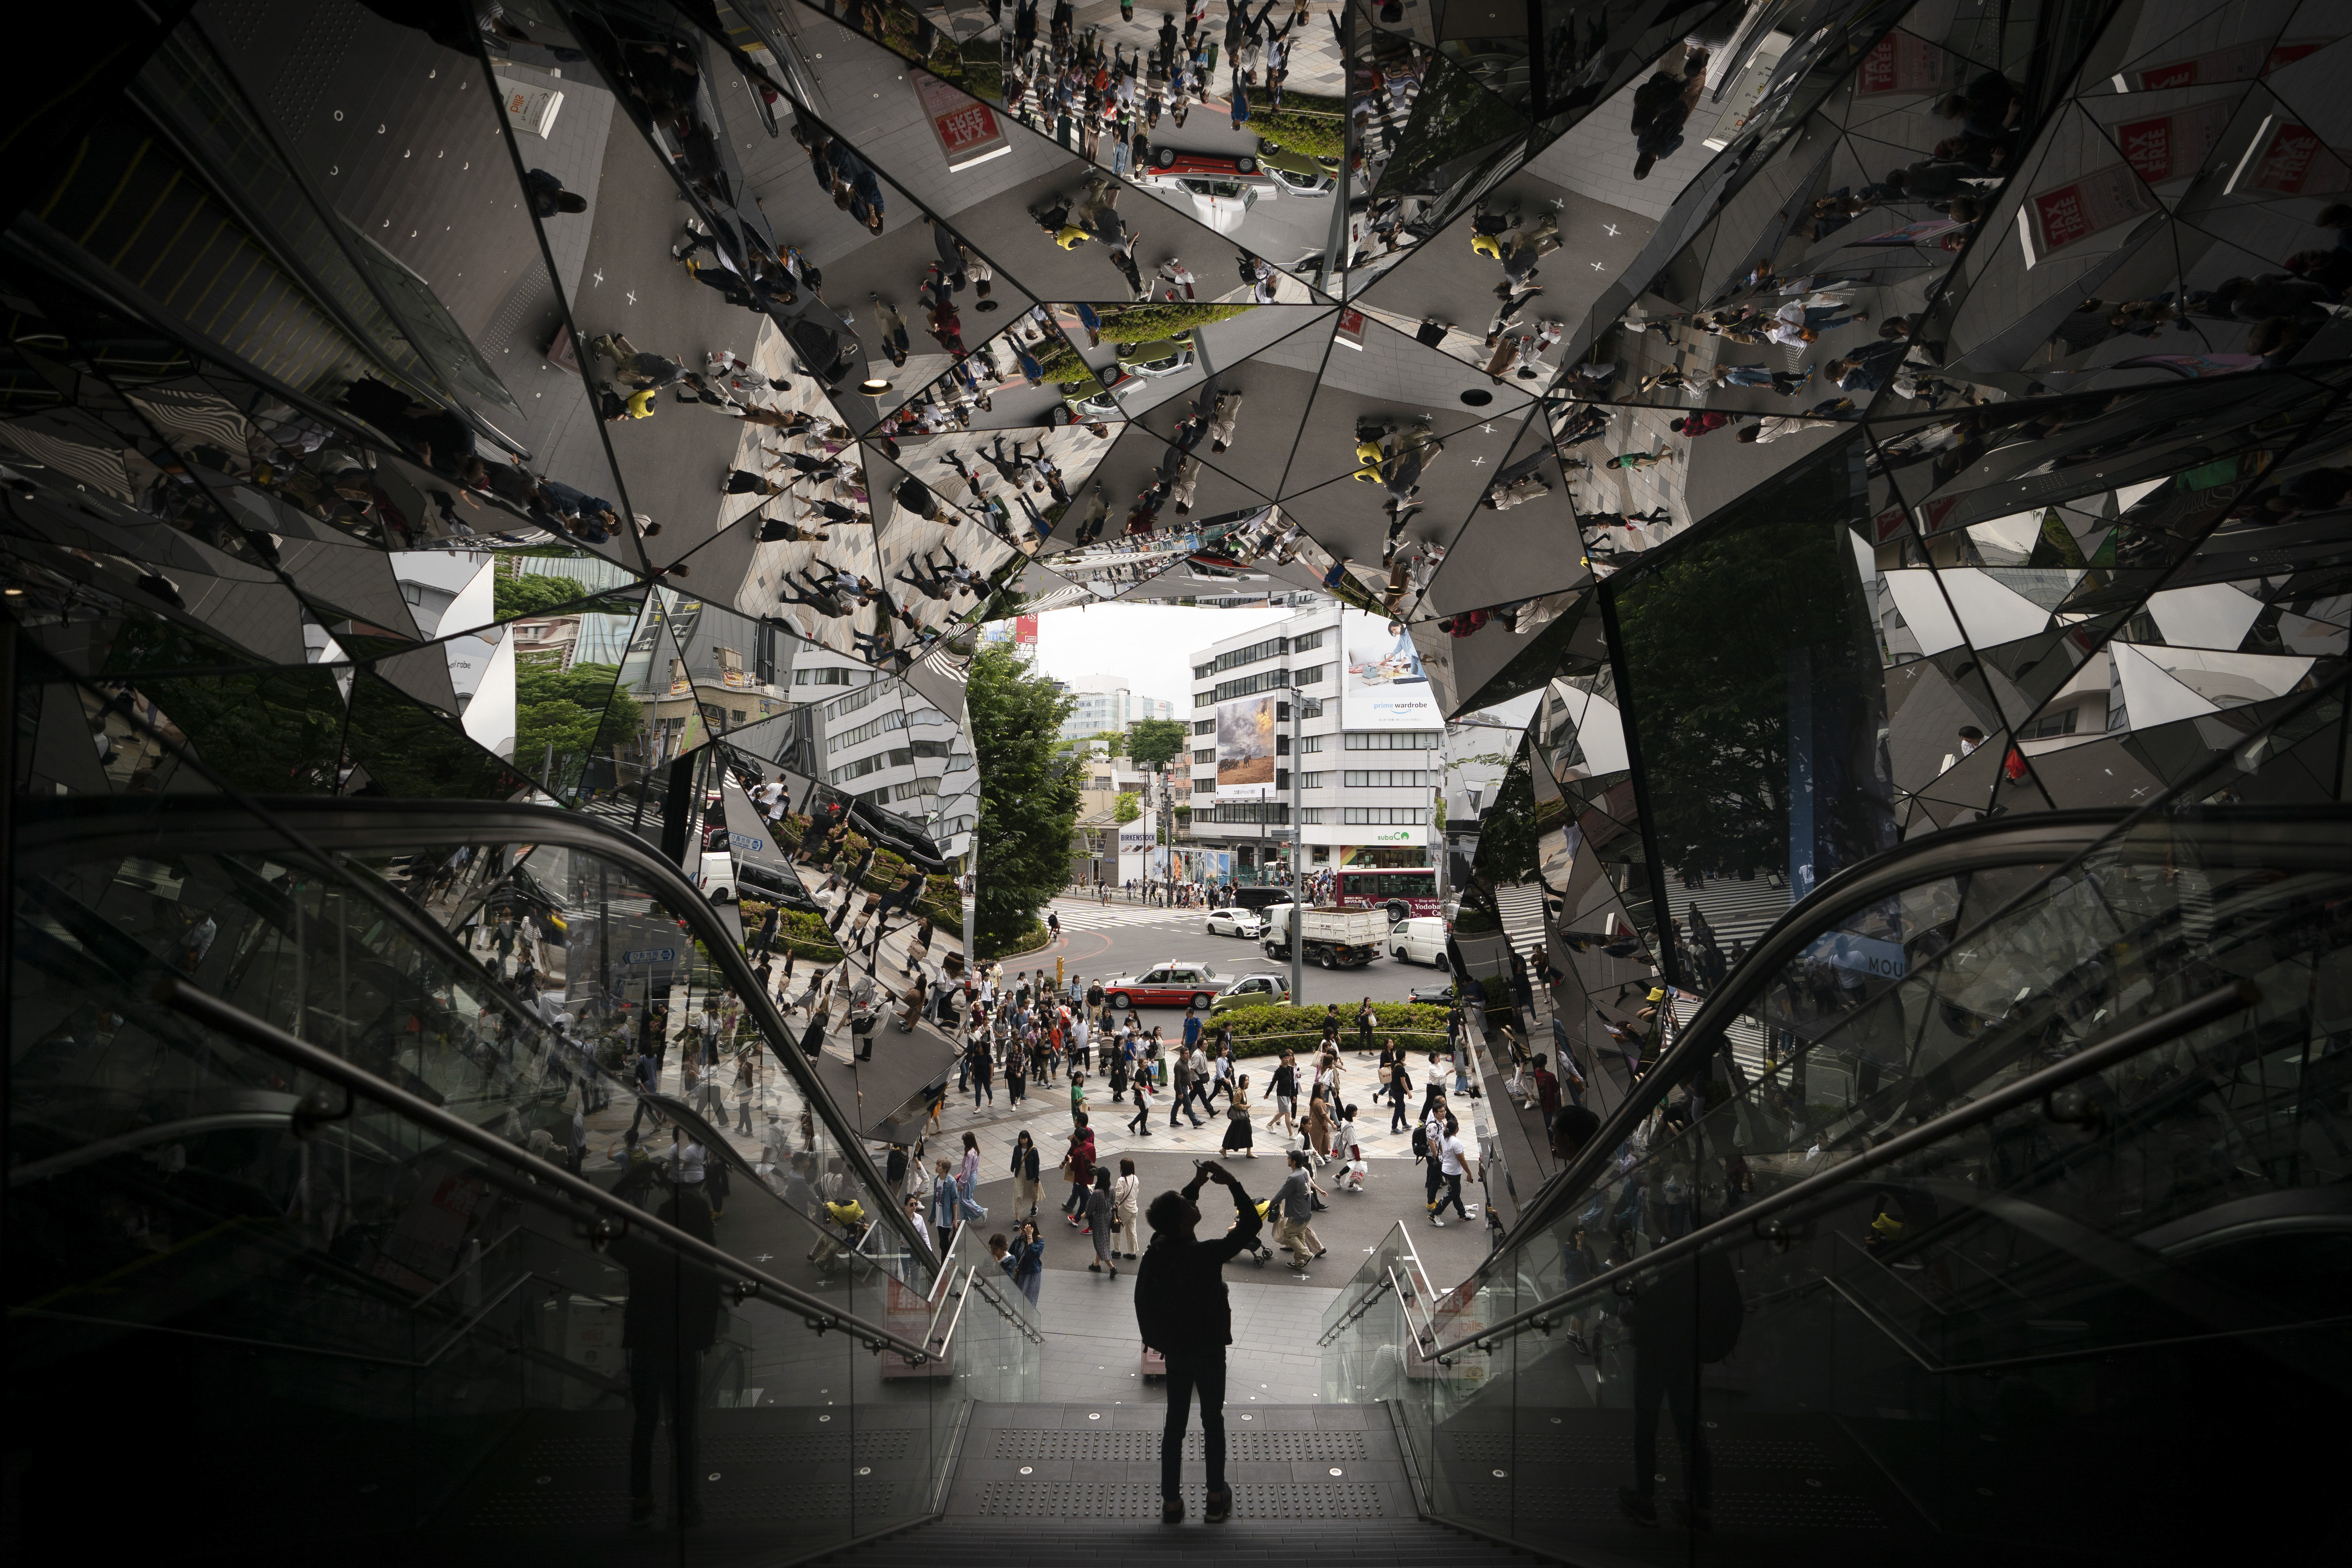 A tourist takes pictures in the entrance way to a shopping mall decorated with mirrors Saturday, May 18, 2019, in Harajuku district of Tokyo. (AP Photo/Jae C. Hong)